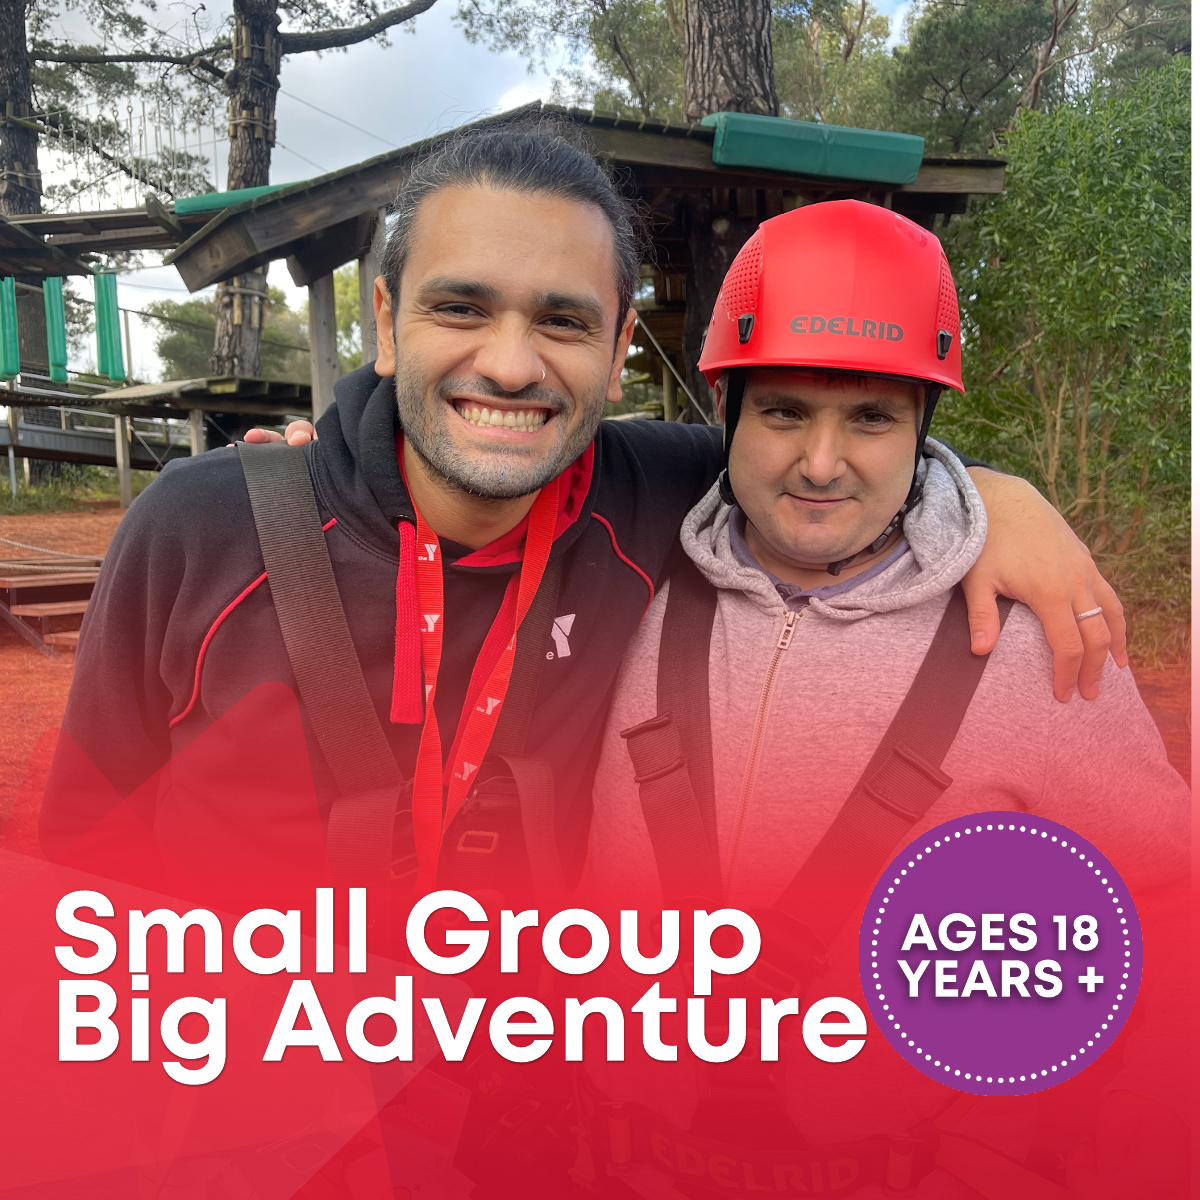 Learn more about small group big advantures